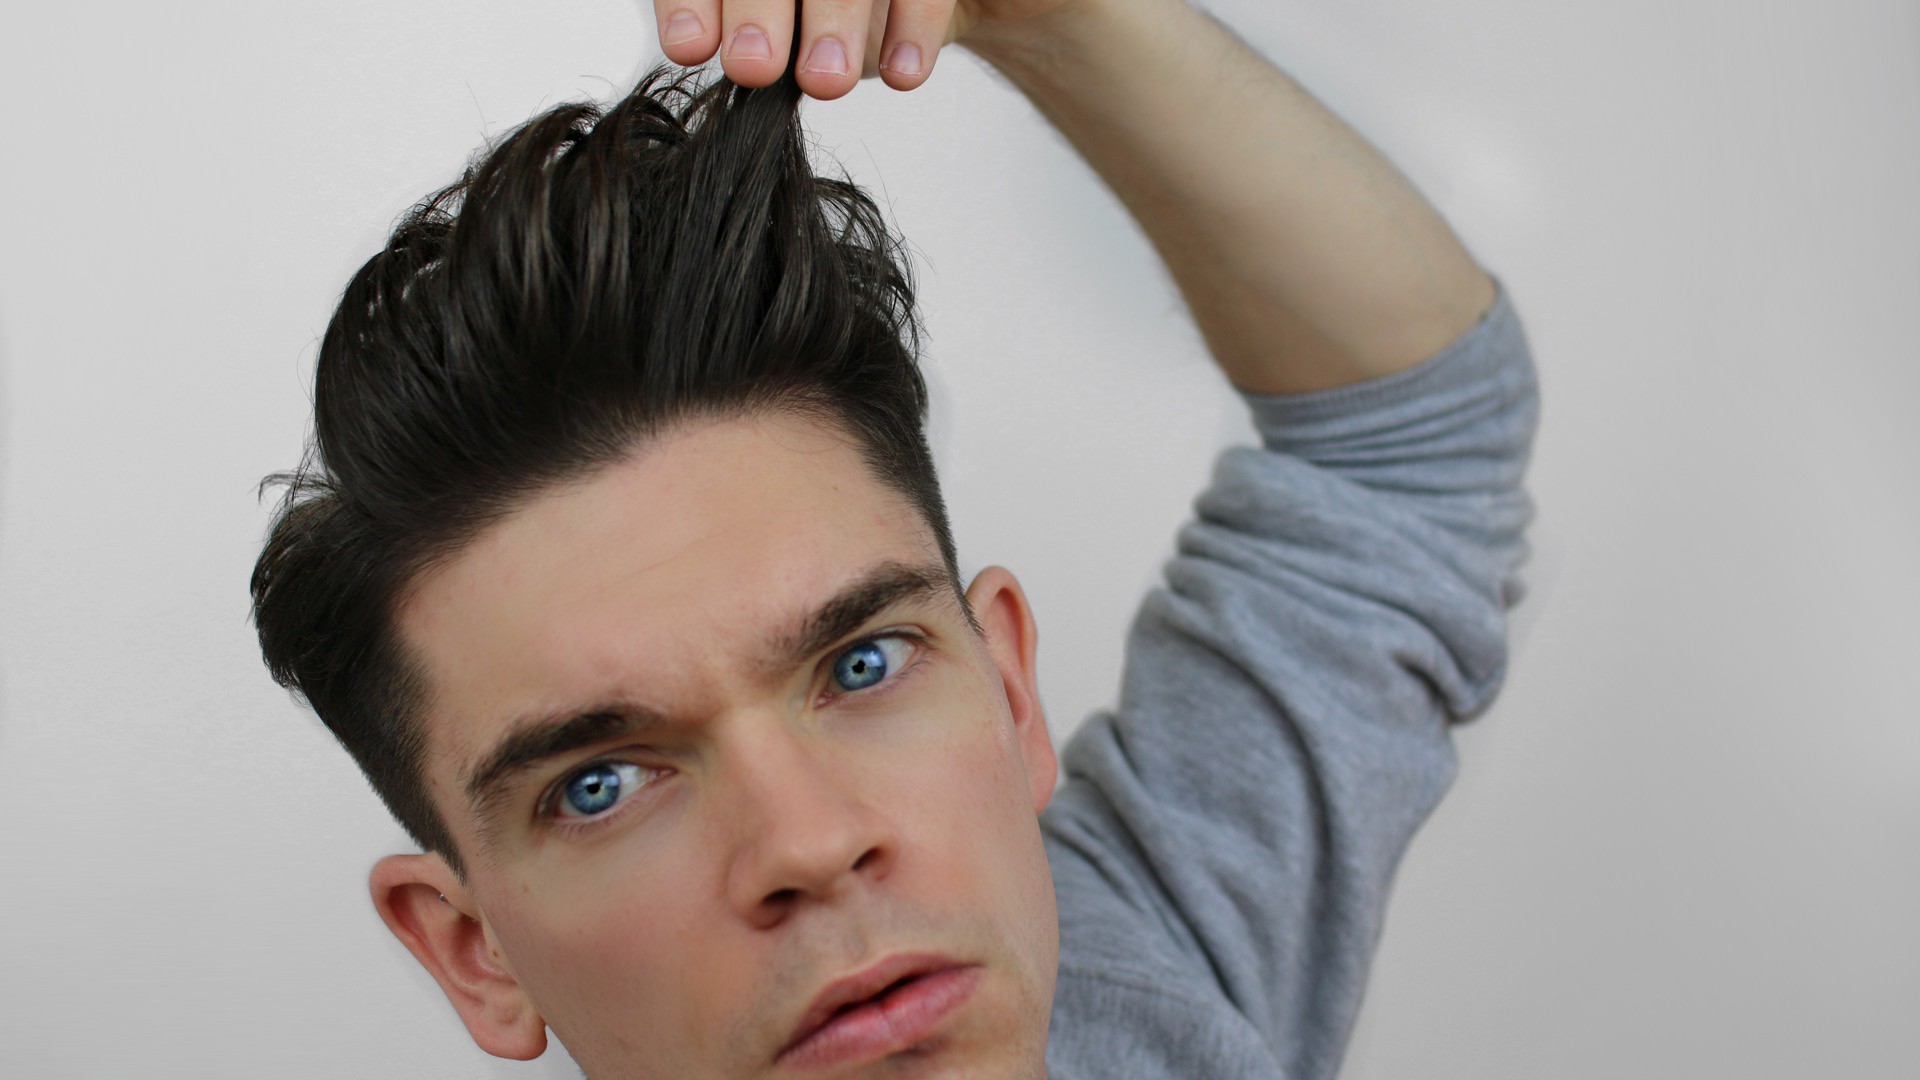 Messy Quiff In 8 'How To' GIFs